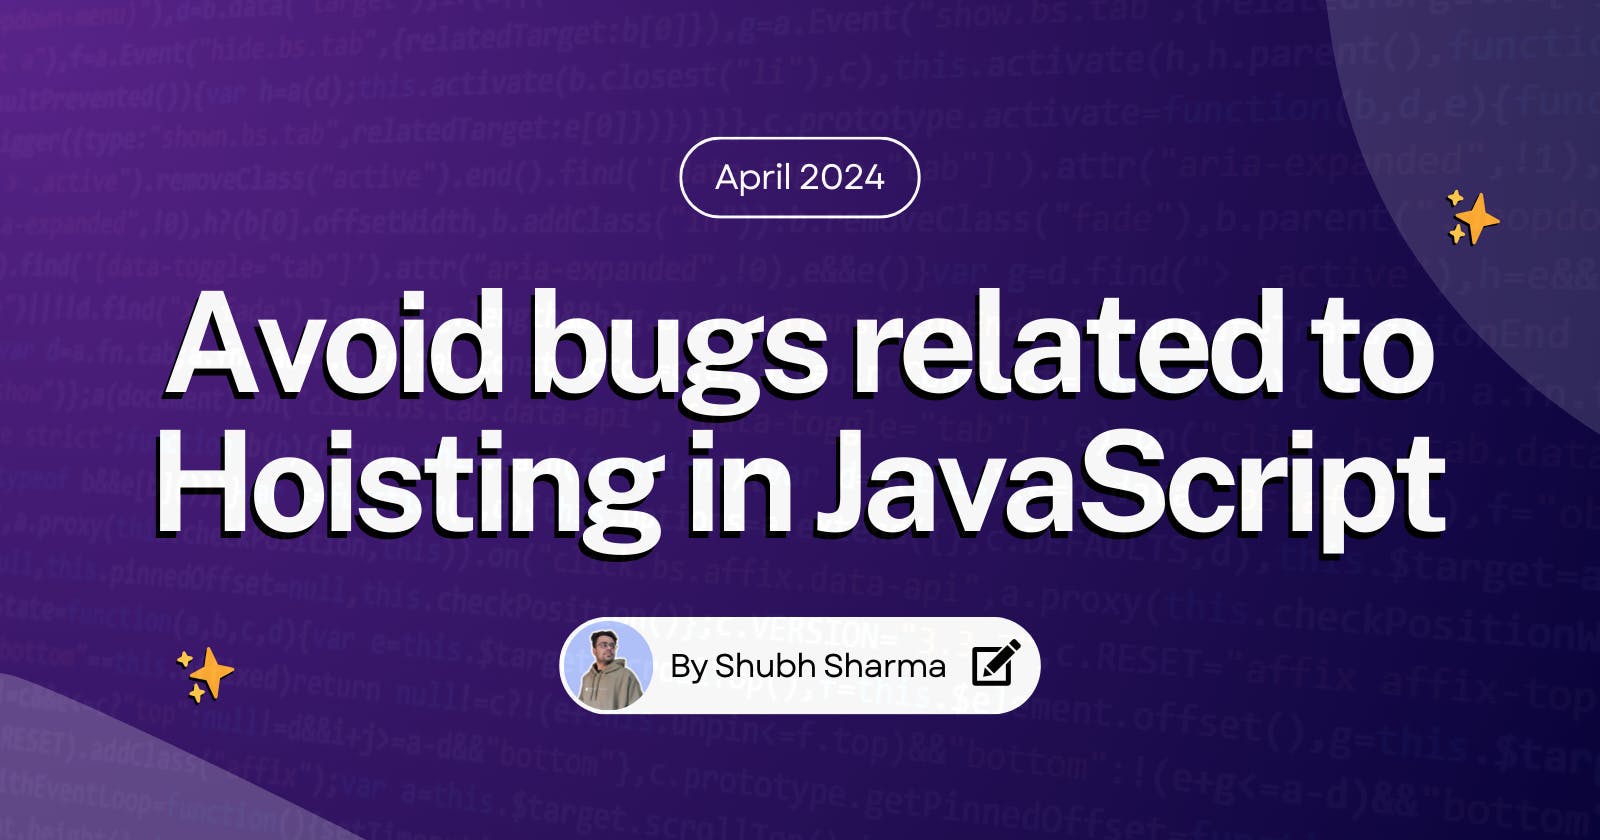 4 Habits to Avoid Bugs related to Hoisting in your JavaScript Code